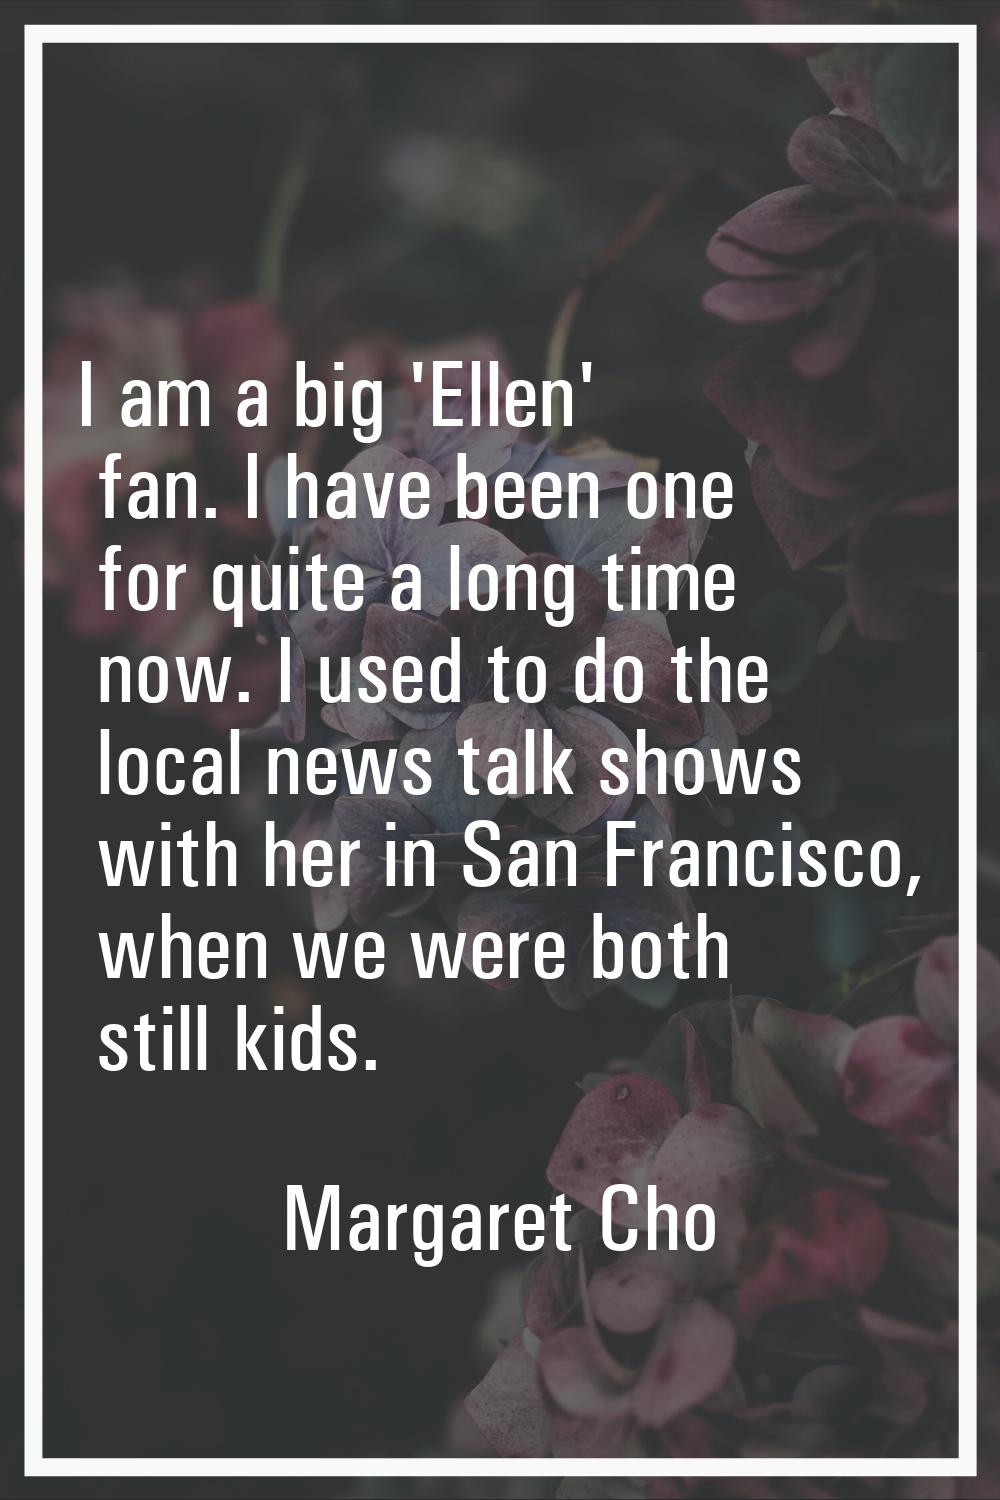 I am a big 'Ellen' fan. I have been one for quite a long time now. I used to do the local news talk